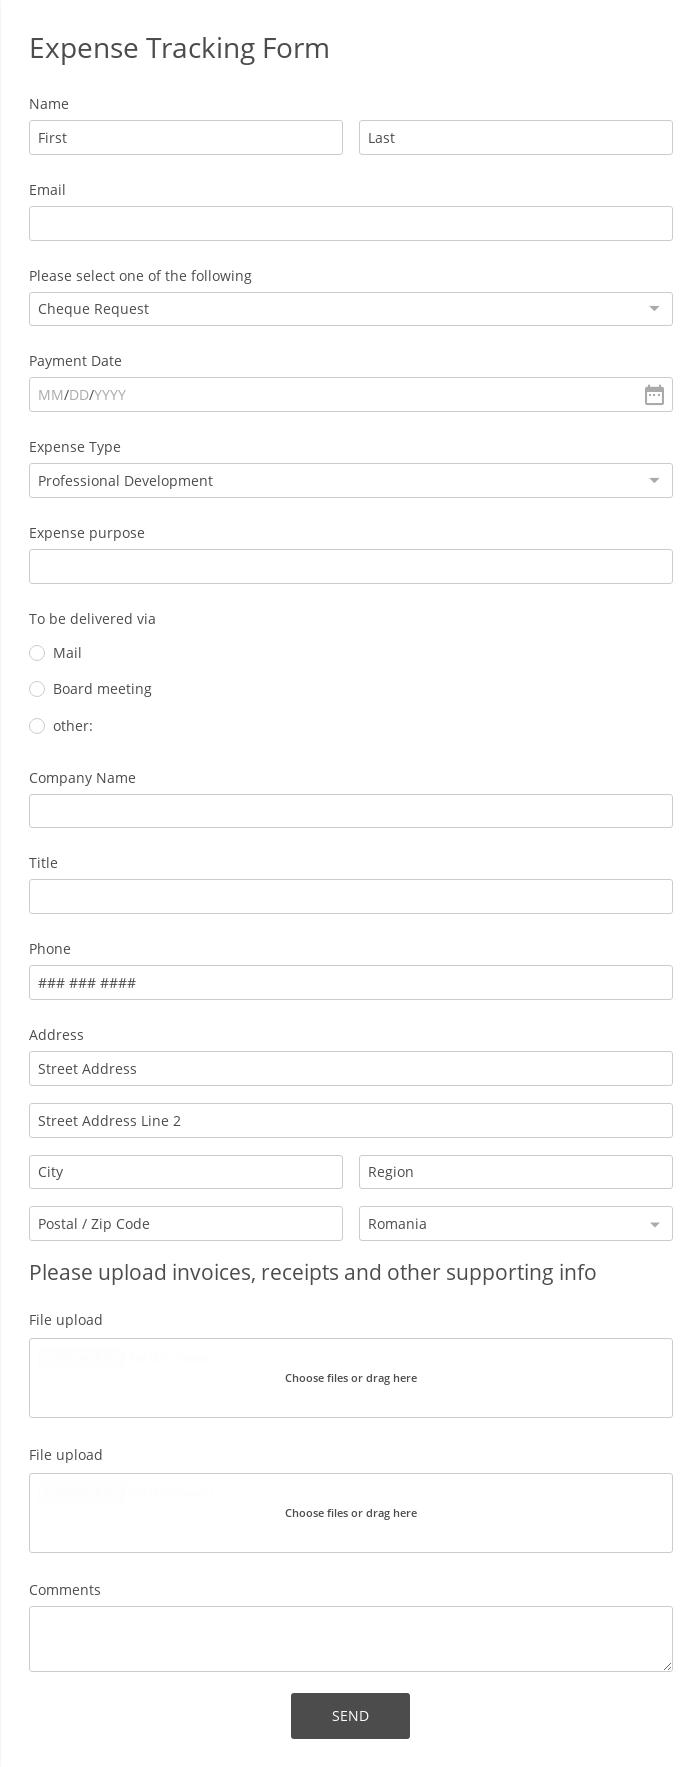 Expense Tracking Form